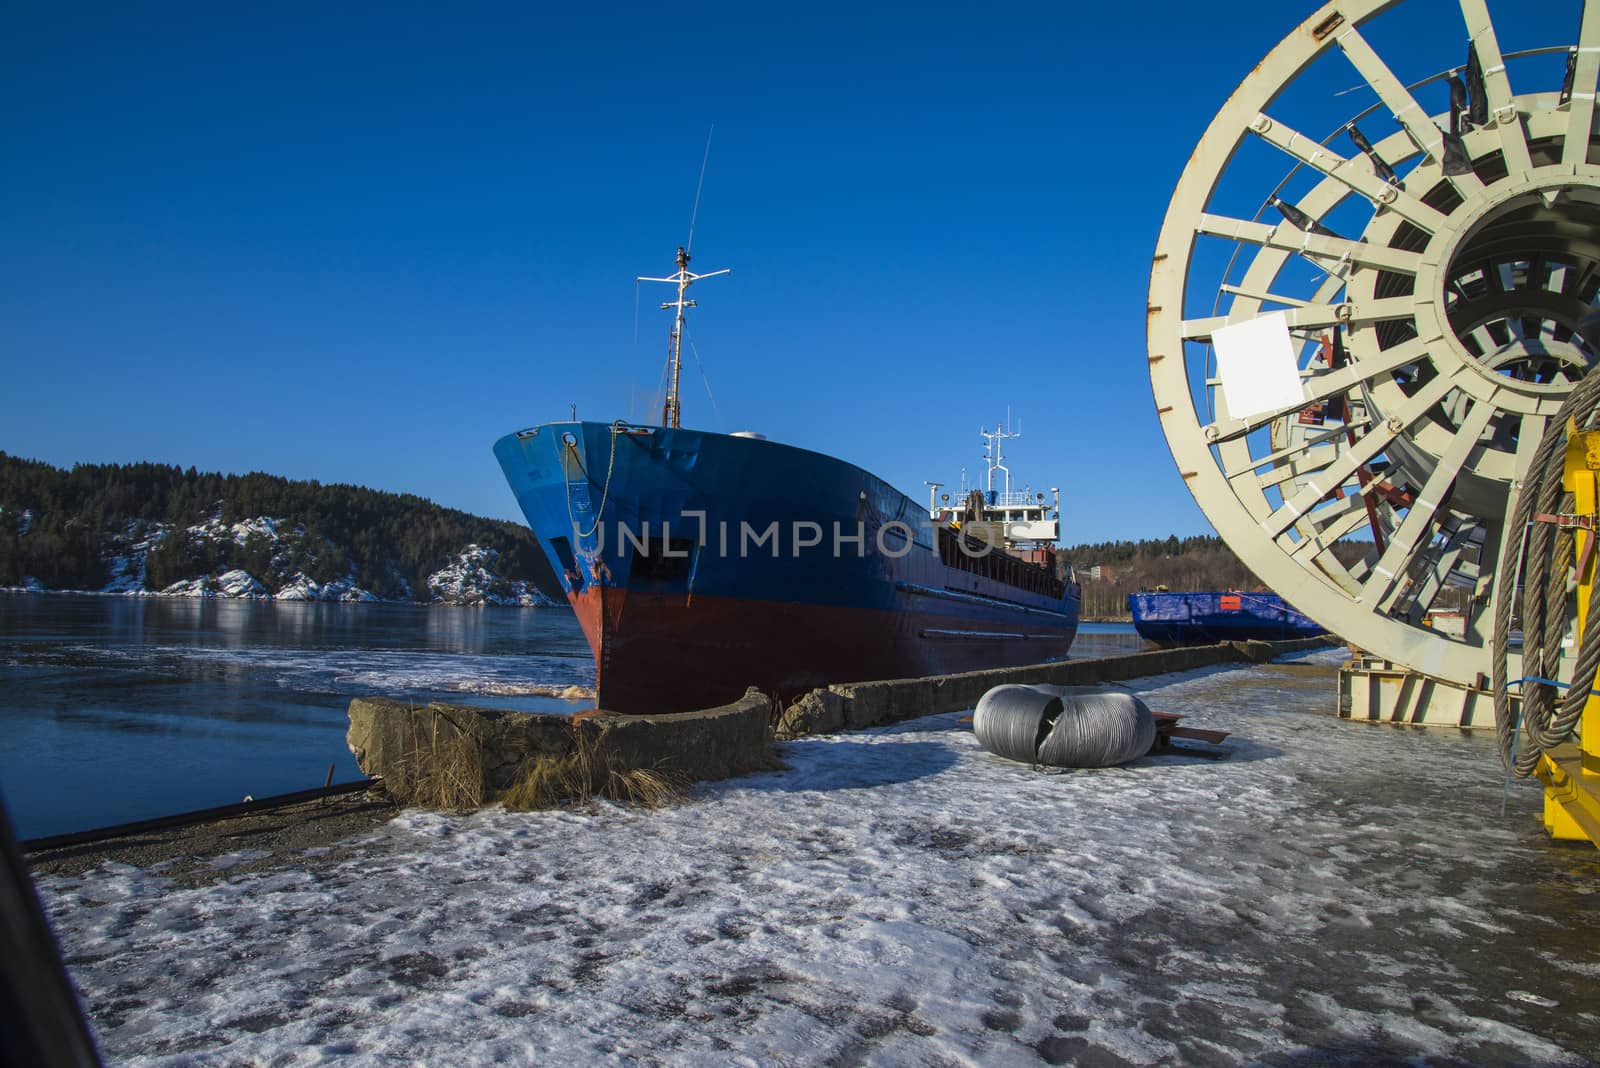 The ship Bal Bulk, Flag: Faroe Island  is a Cargo ship which transports dry cargo. The picture is shot one day in February 2013, at the port of Halden, Norway.